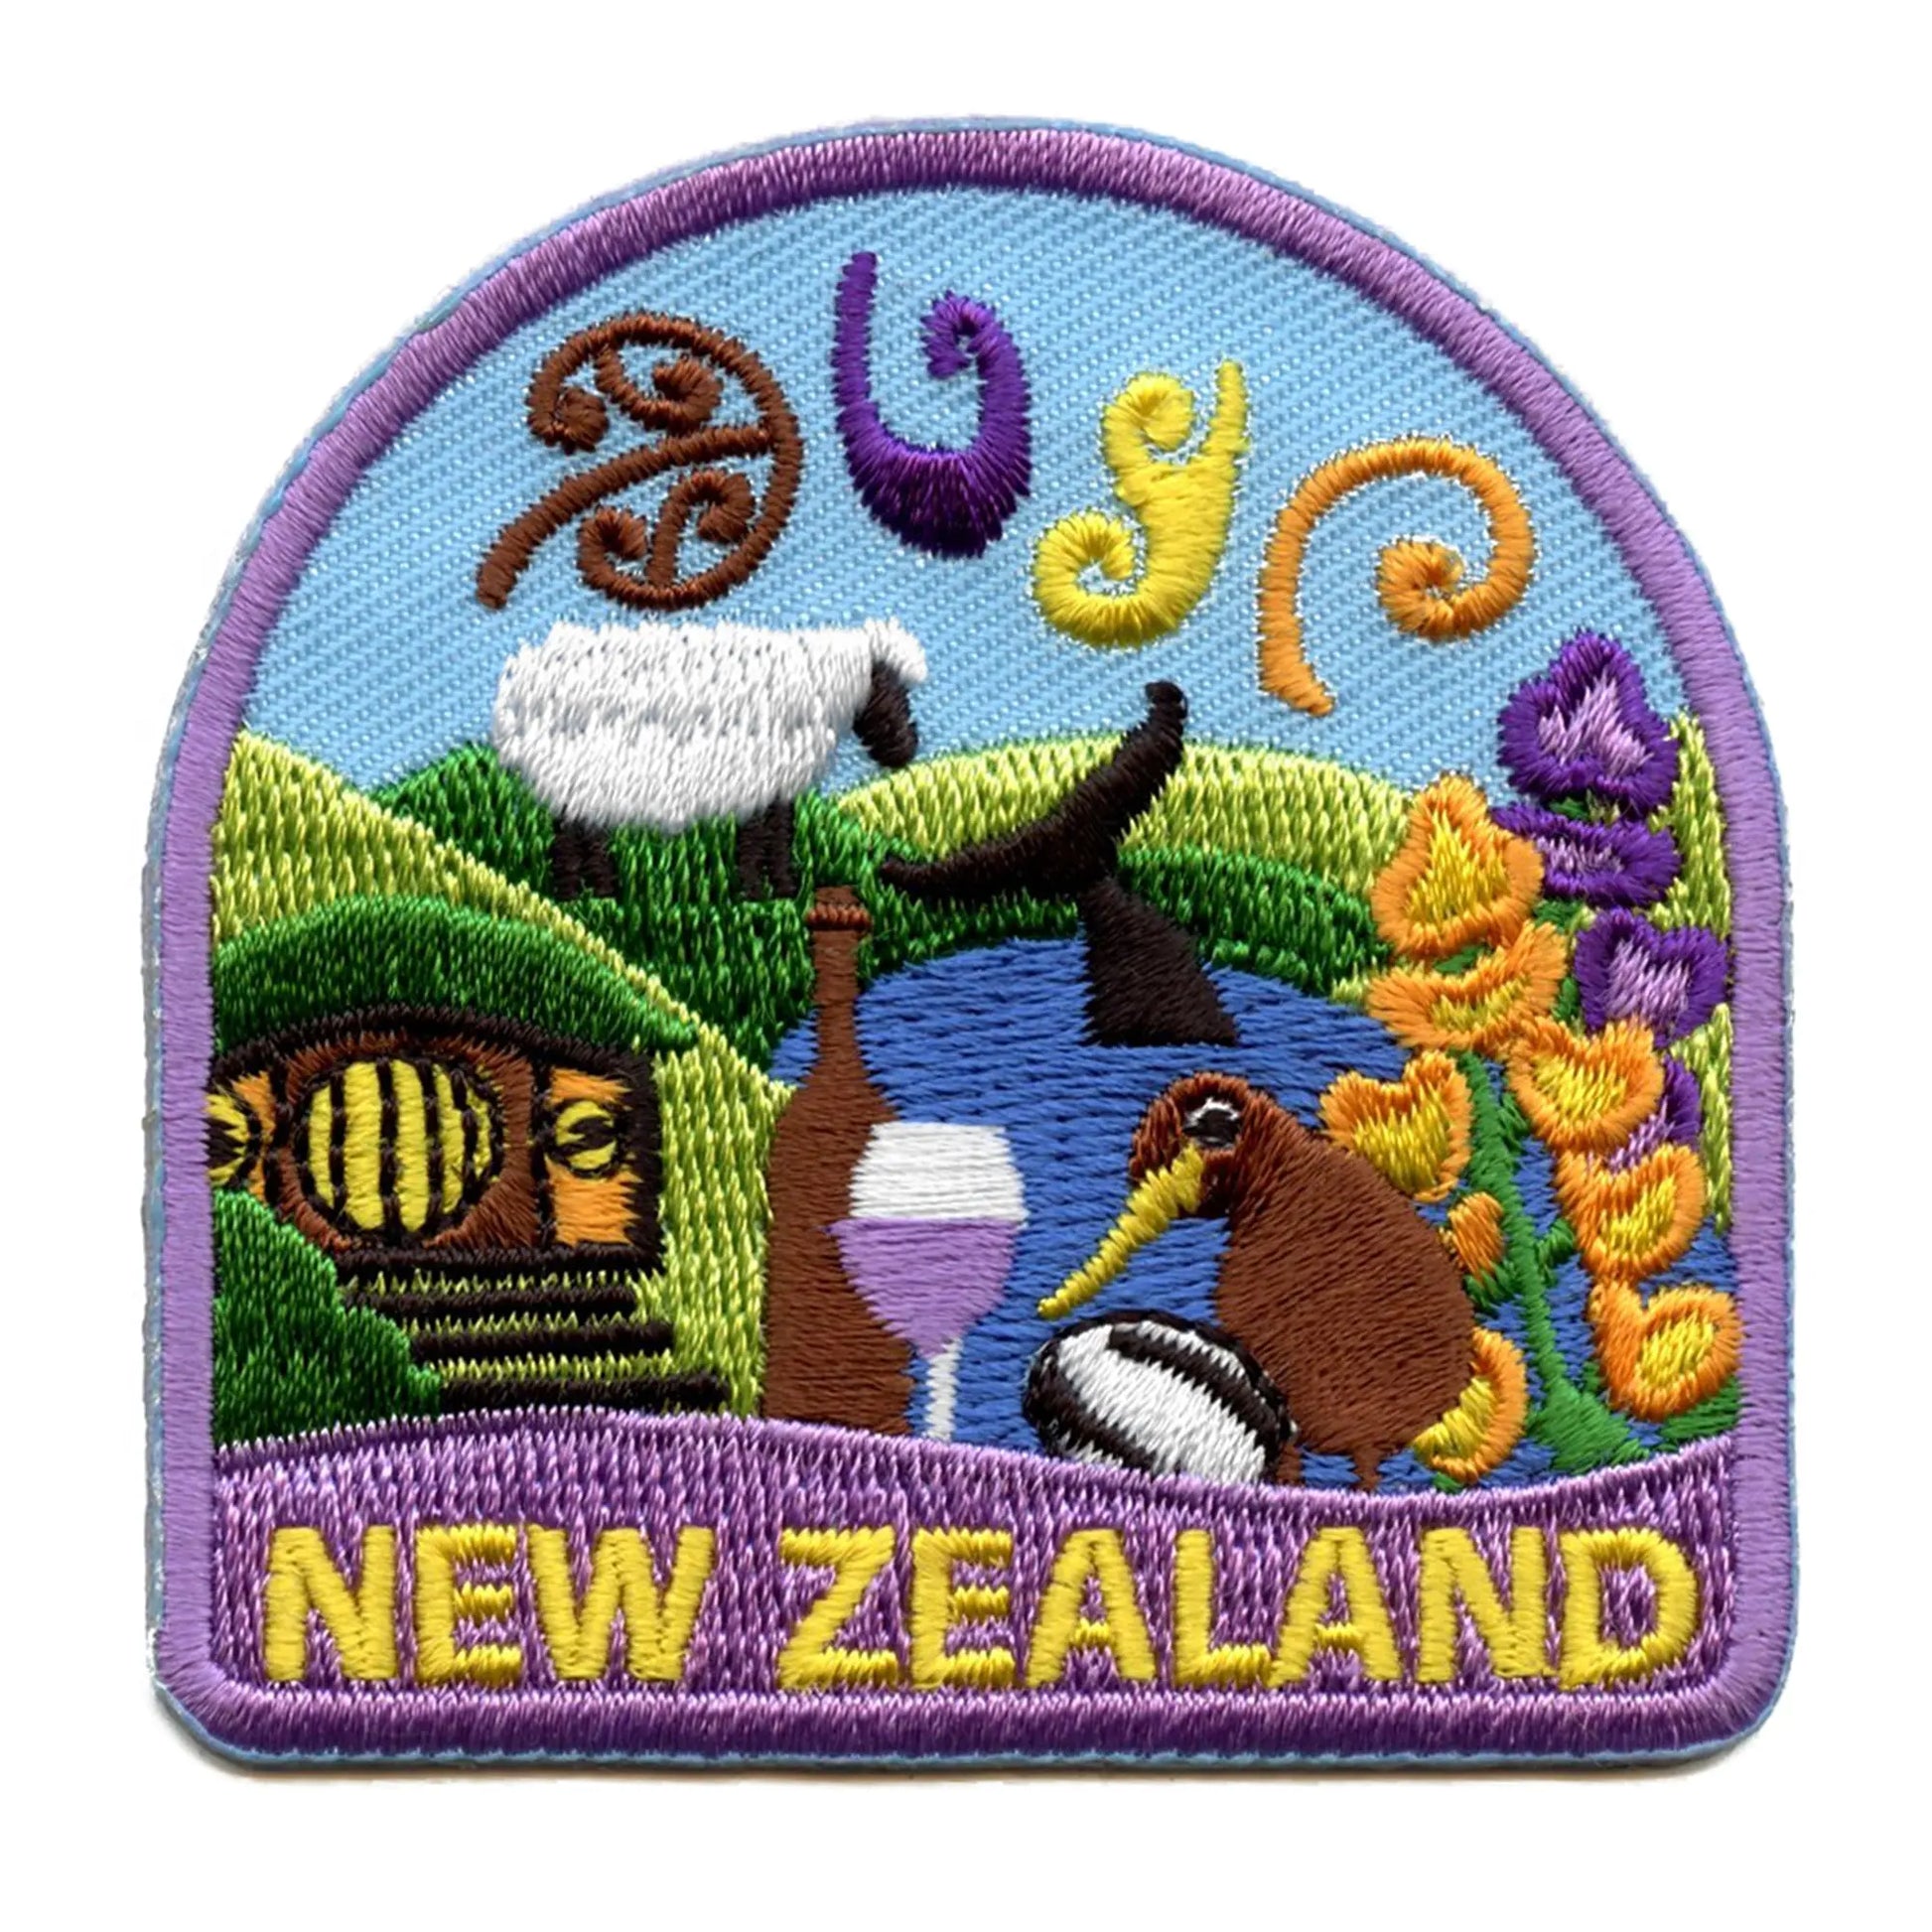 New Zealand World Showcase Patch Shield Embroidered Iron On 